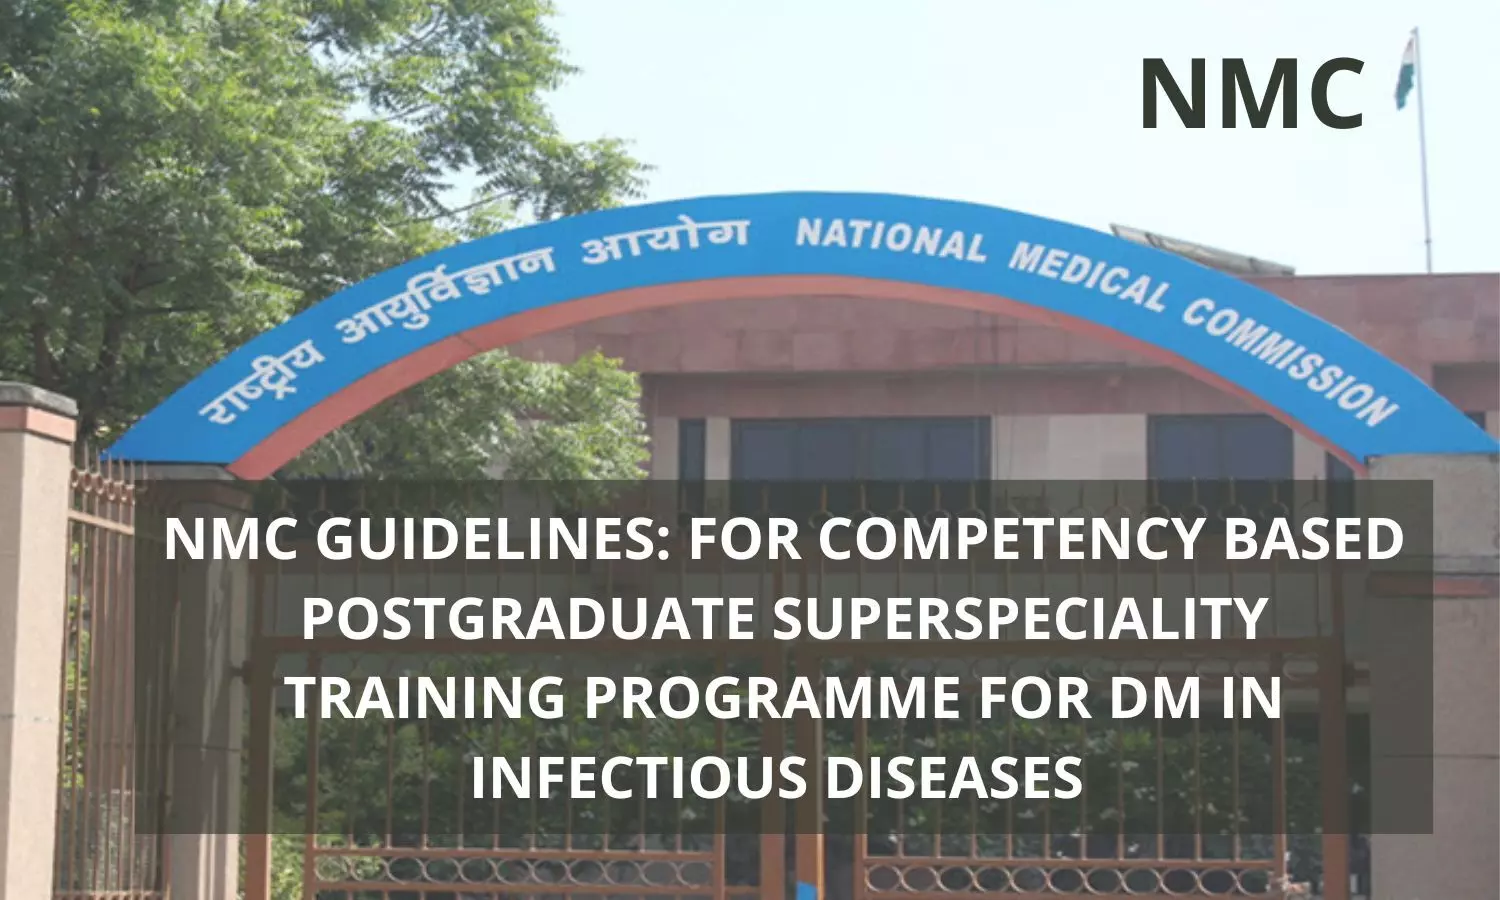 NMC Guidelines For Competency-Based Training Programme For DM Infectious Diseases